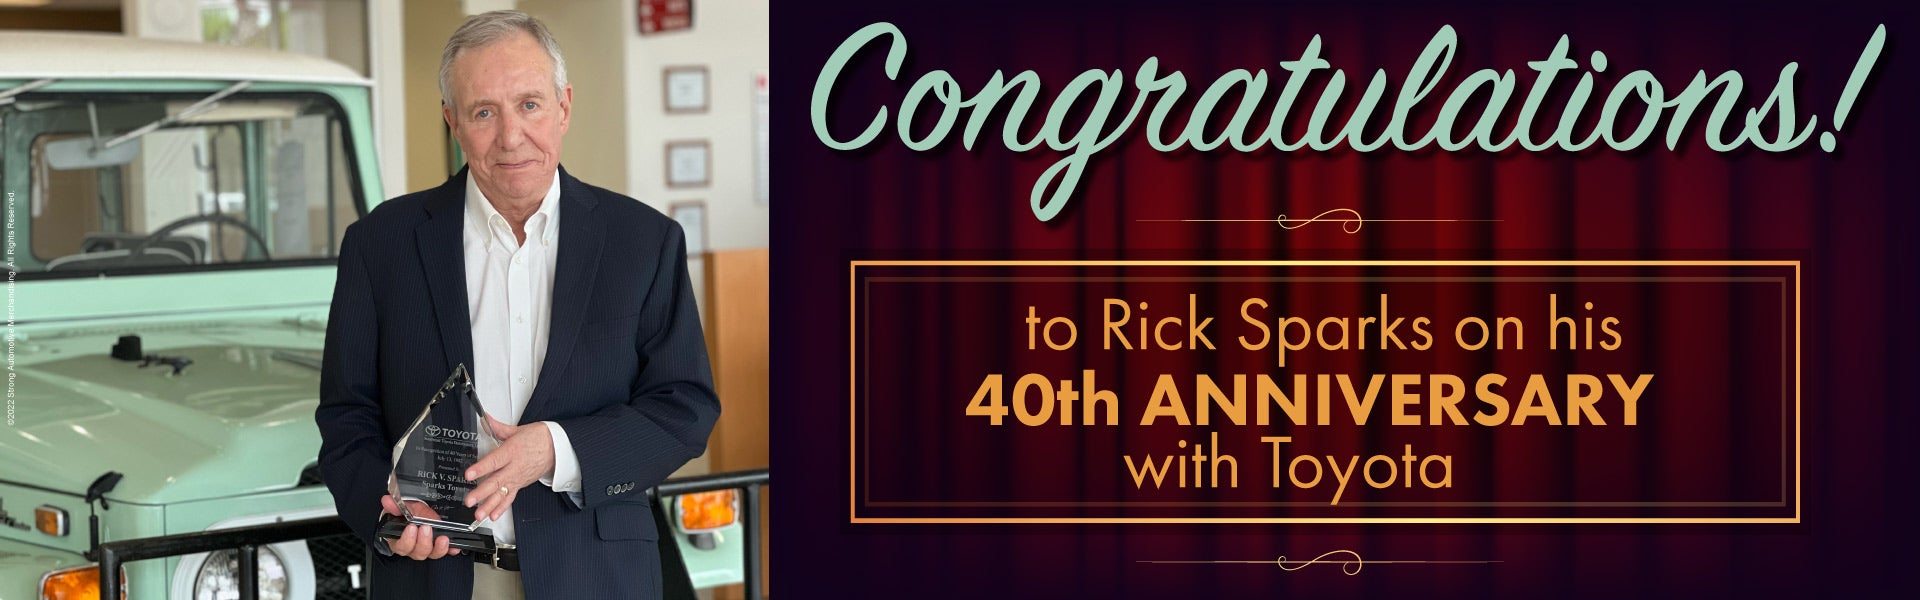 Congrats to Rick Sparks on his 40th Anniversary with Toyota